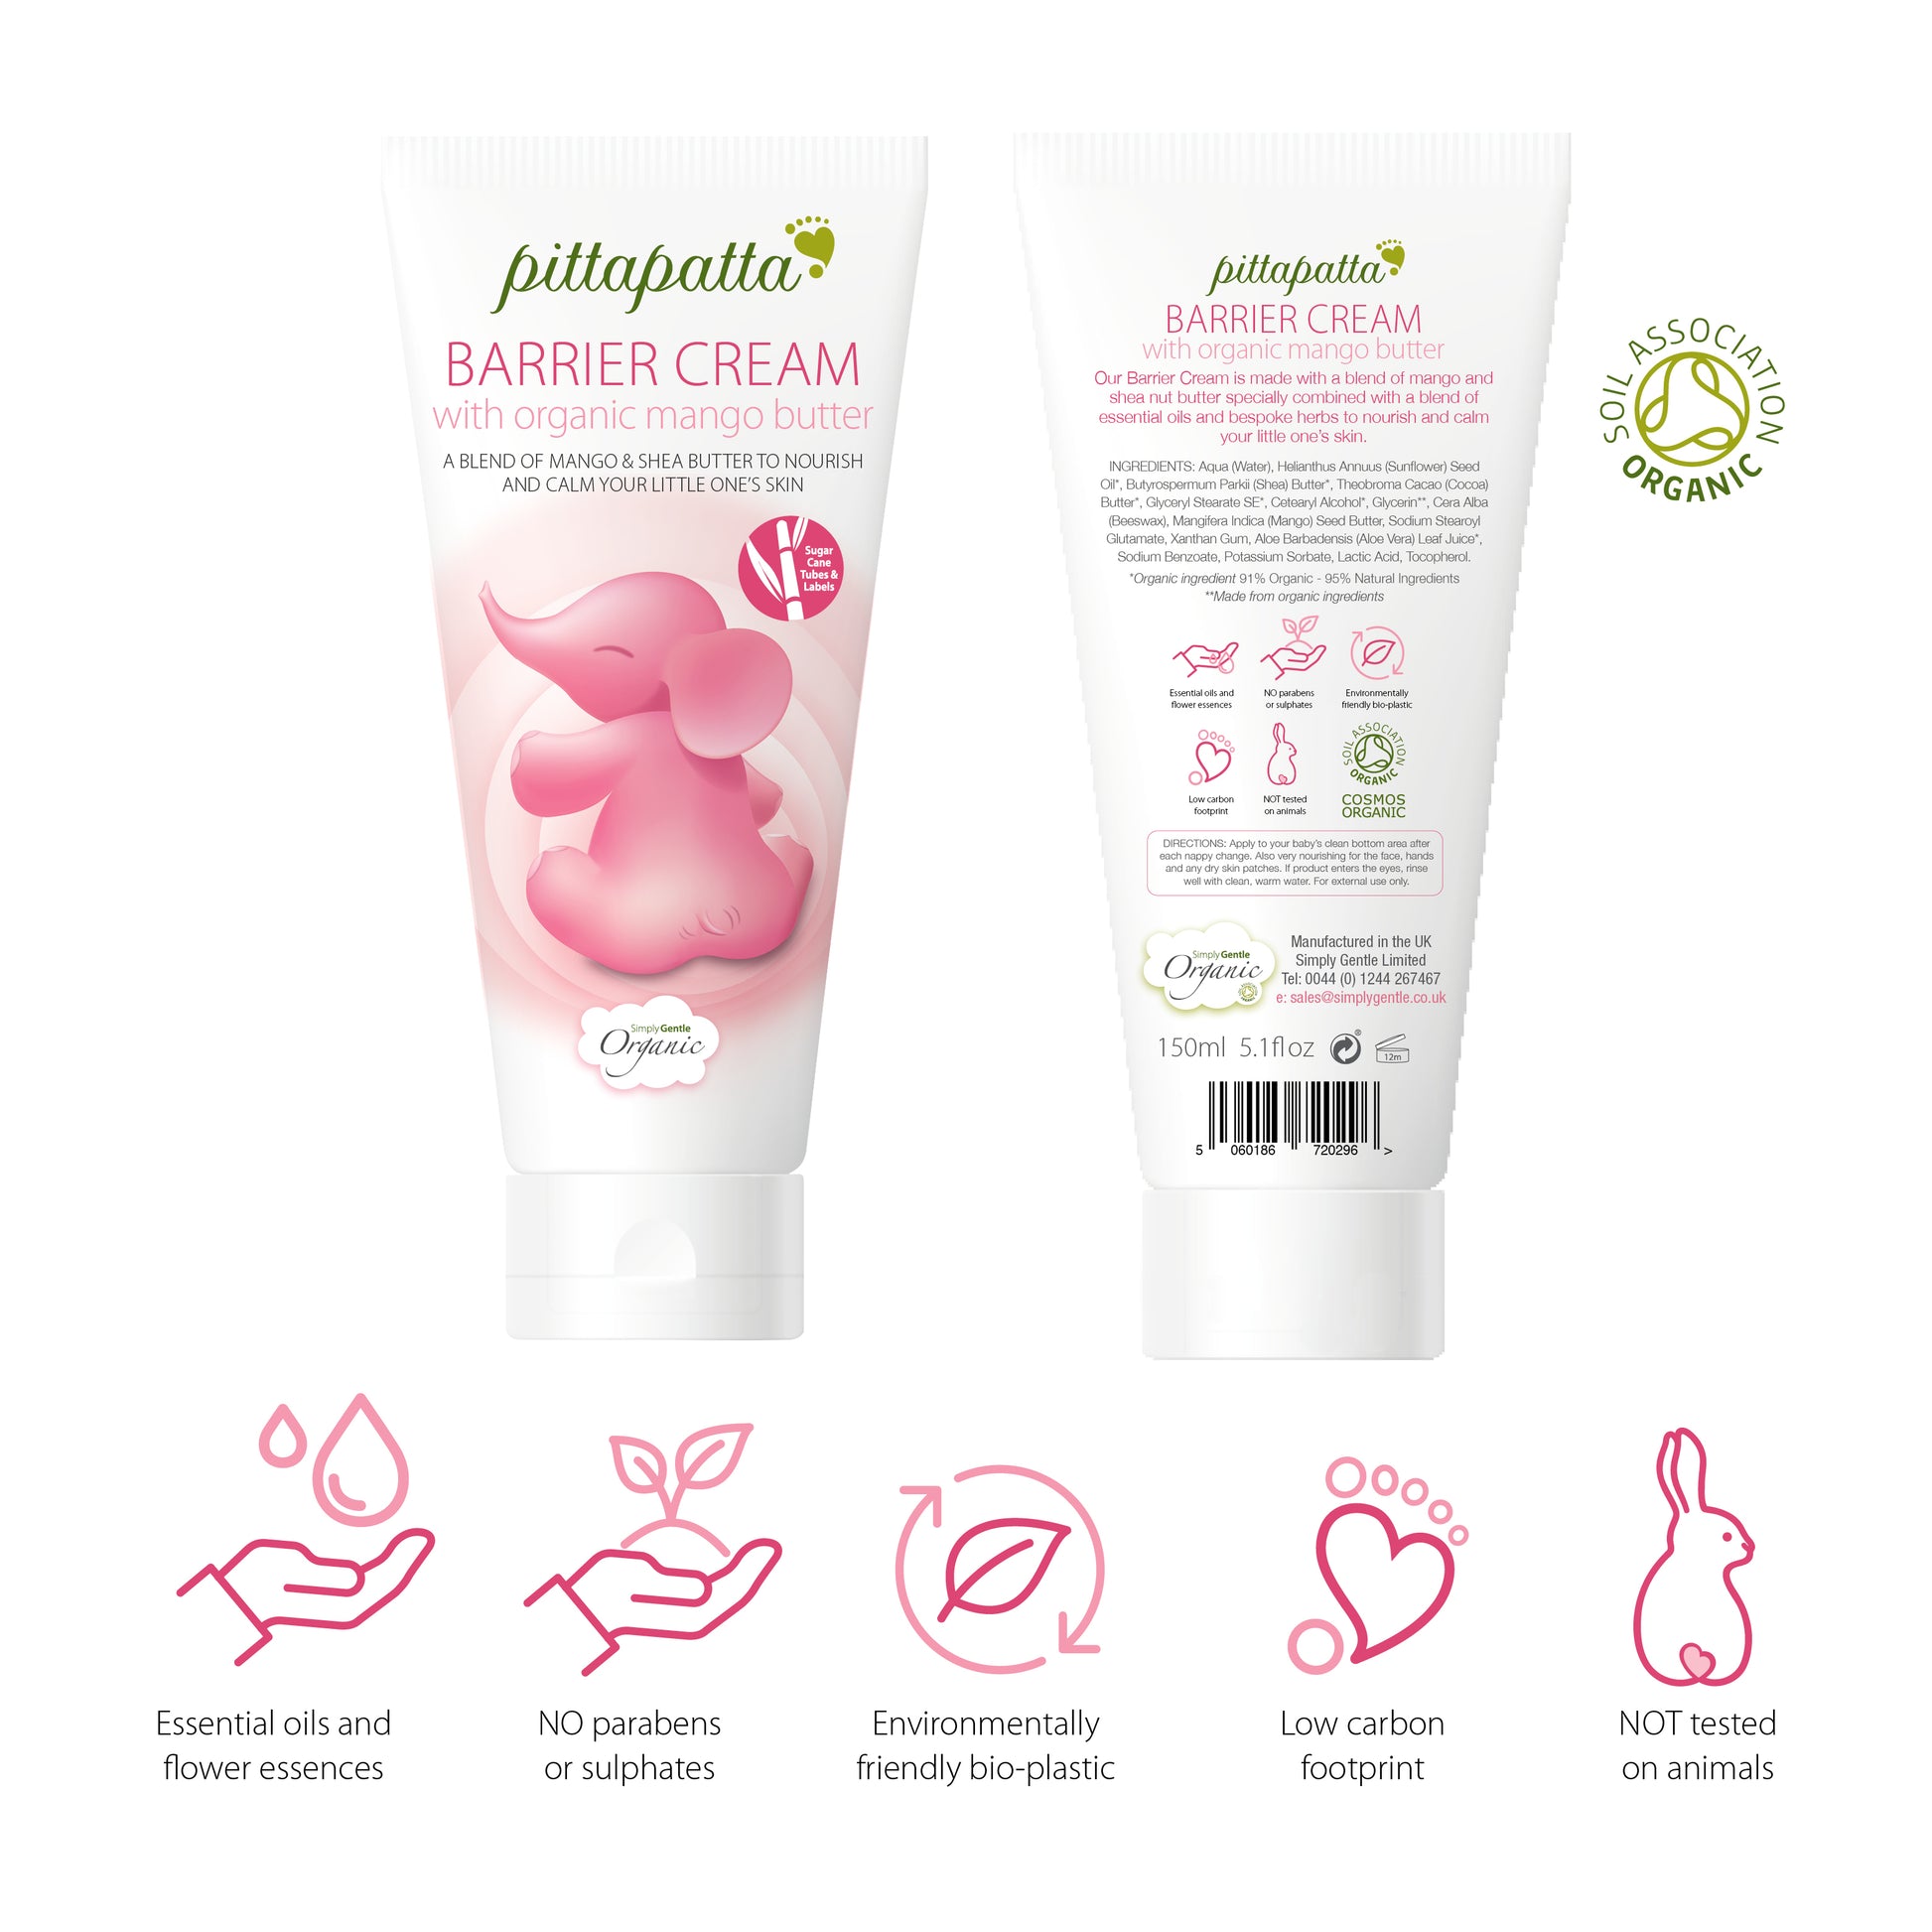 Pittapatta Barrier Cream is made with a blend of mango and shea nut butter specially combined with a blend of essential oils and bespoke herbs to nourish and calm your little one’s skin. 